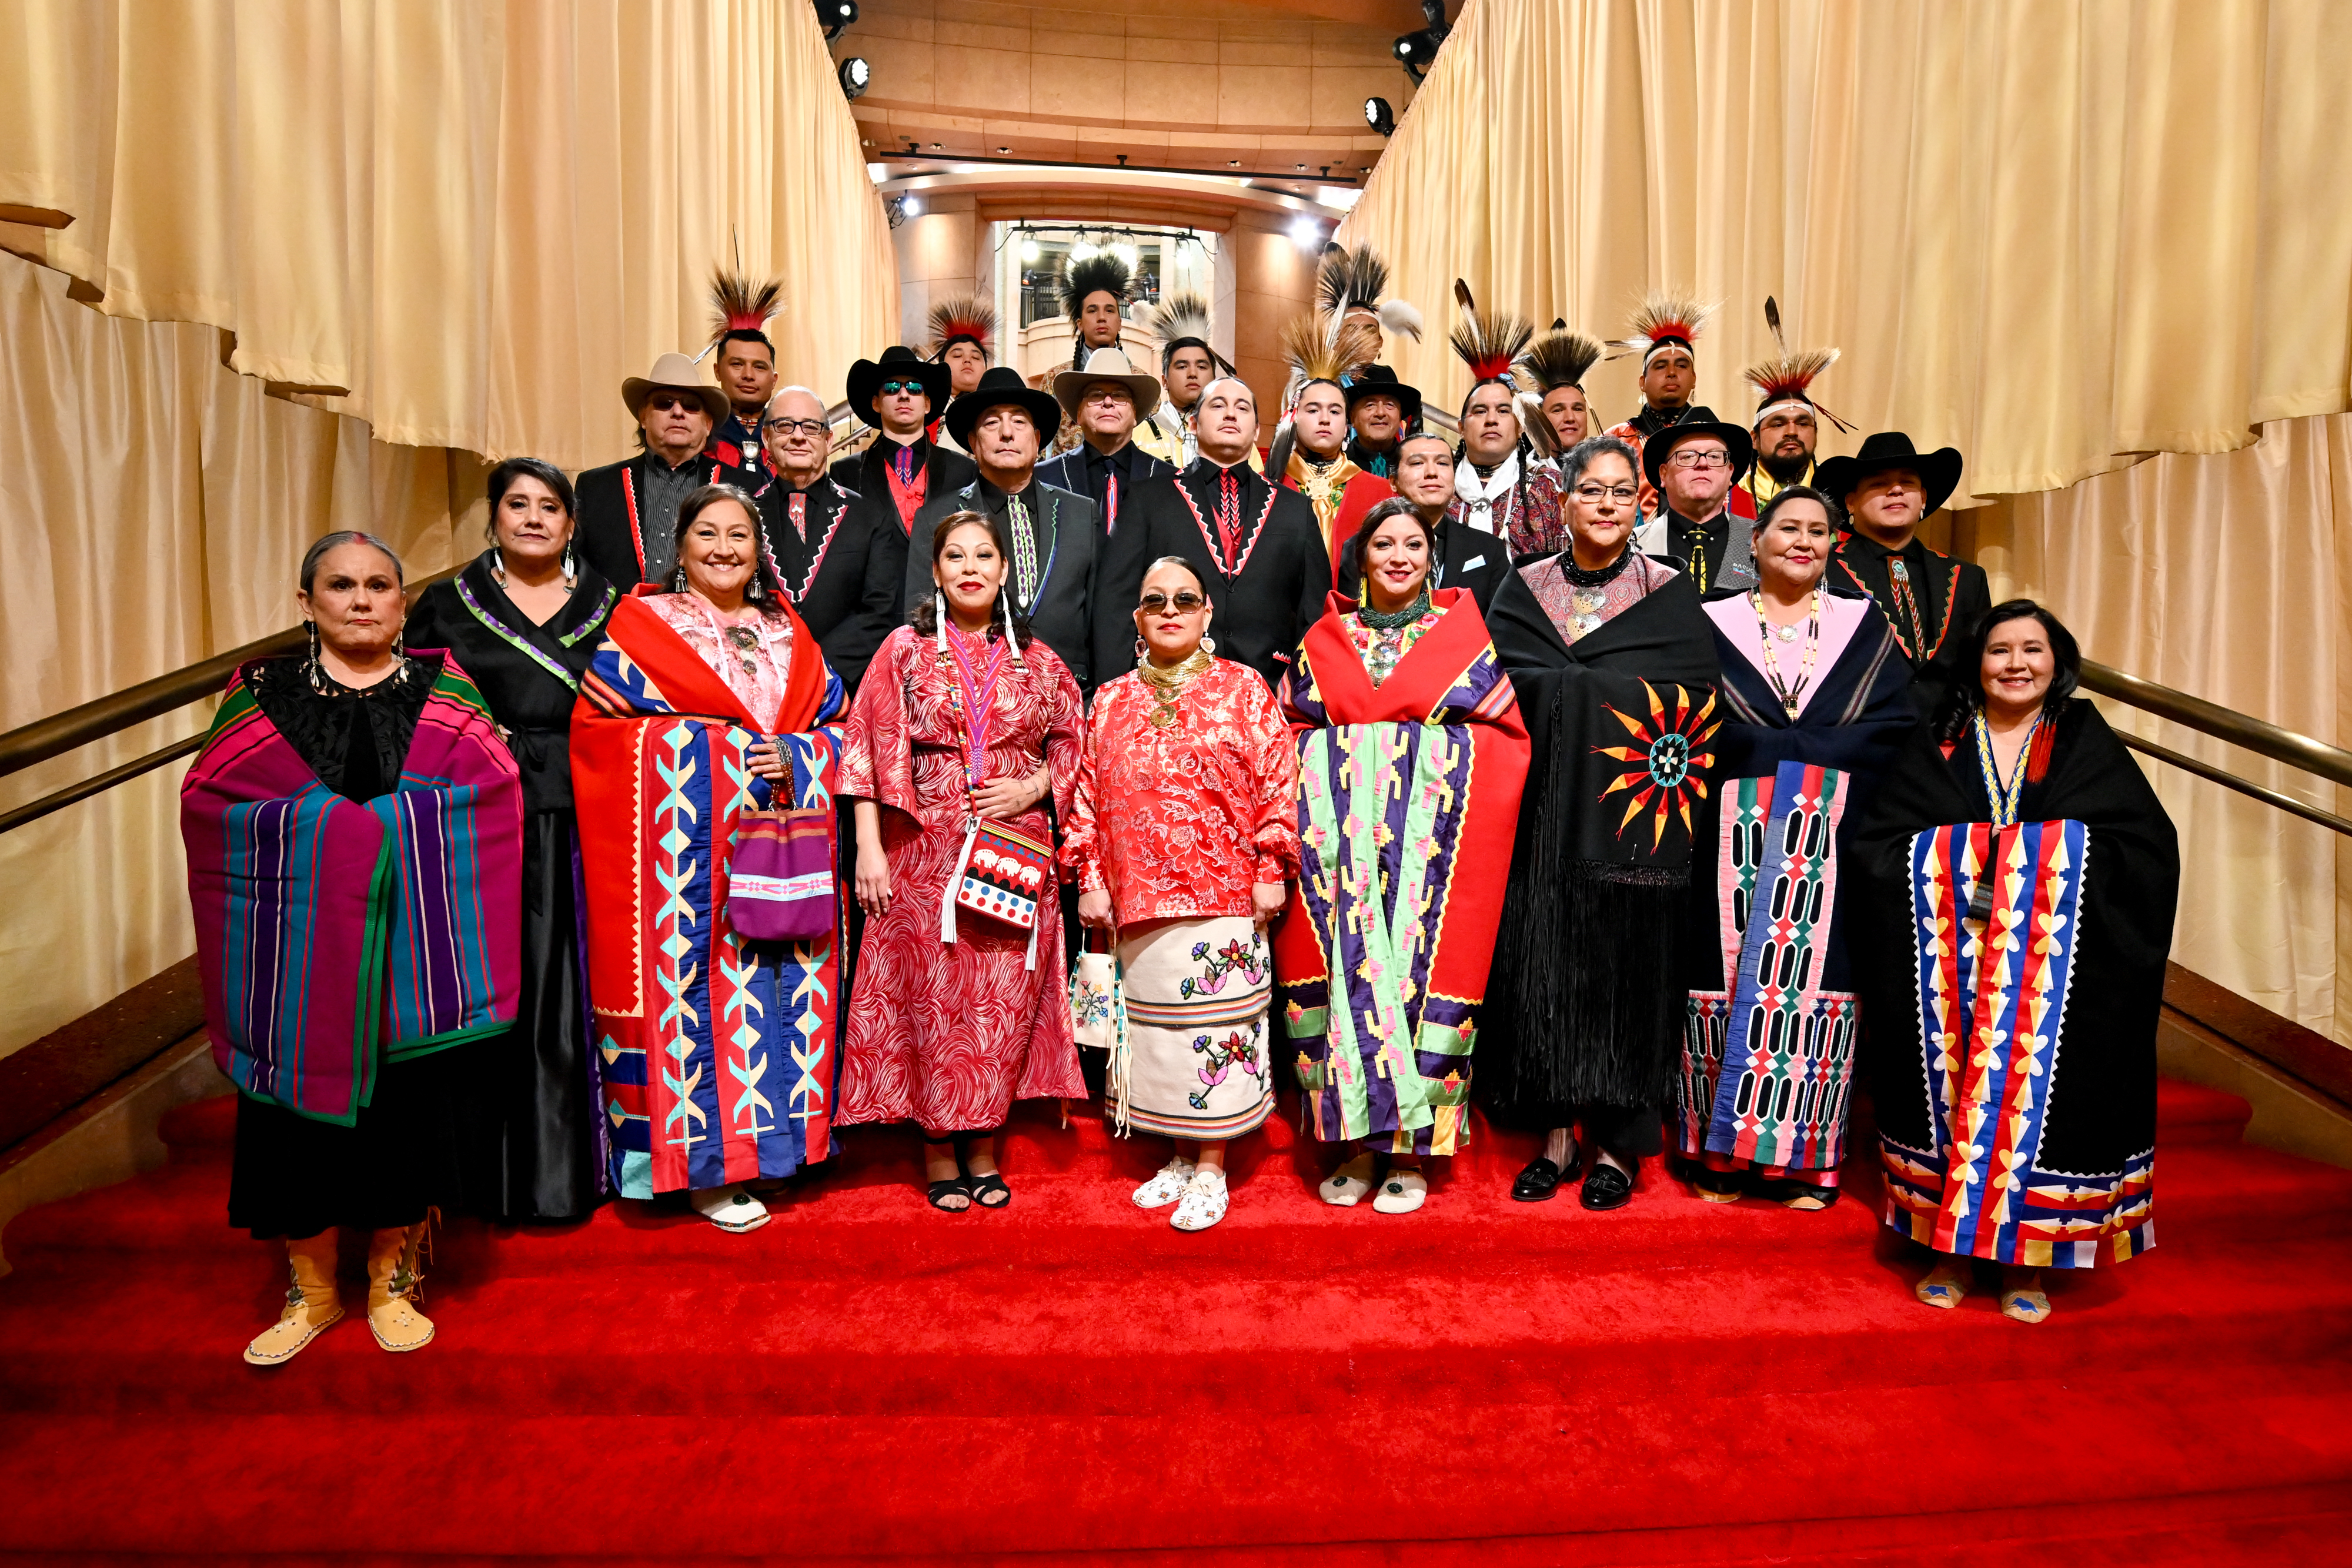 Members of the Osage Nation pose for a group photo on a set of steps at the 96th Annual Oscars